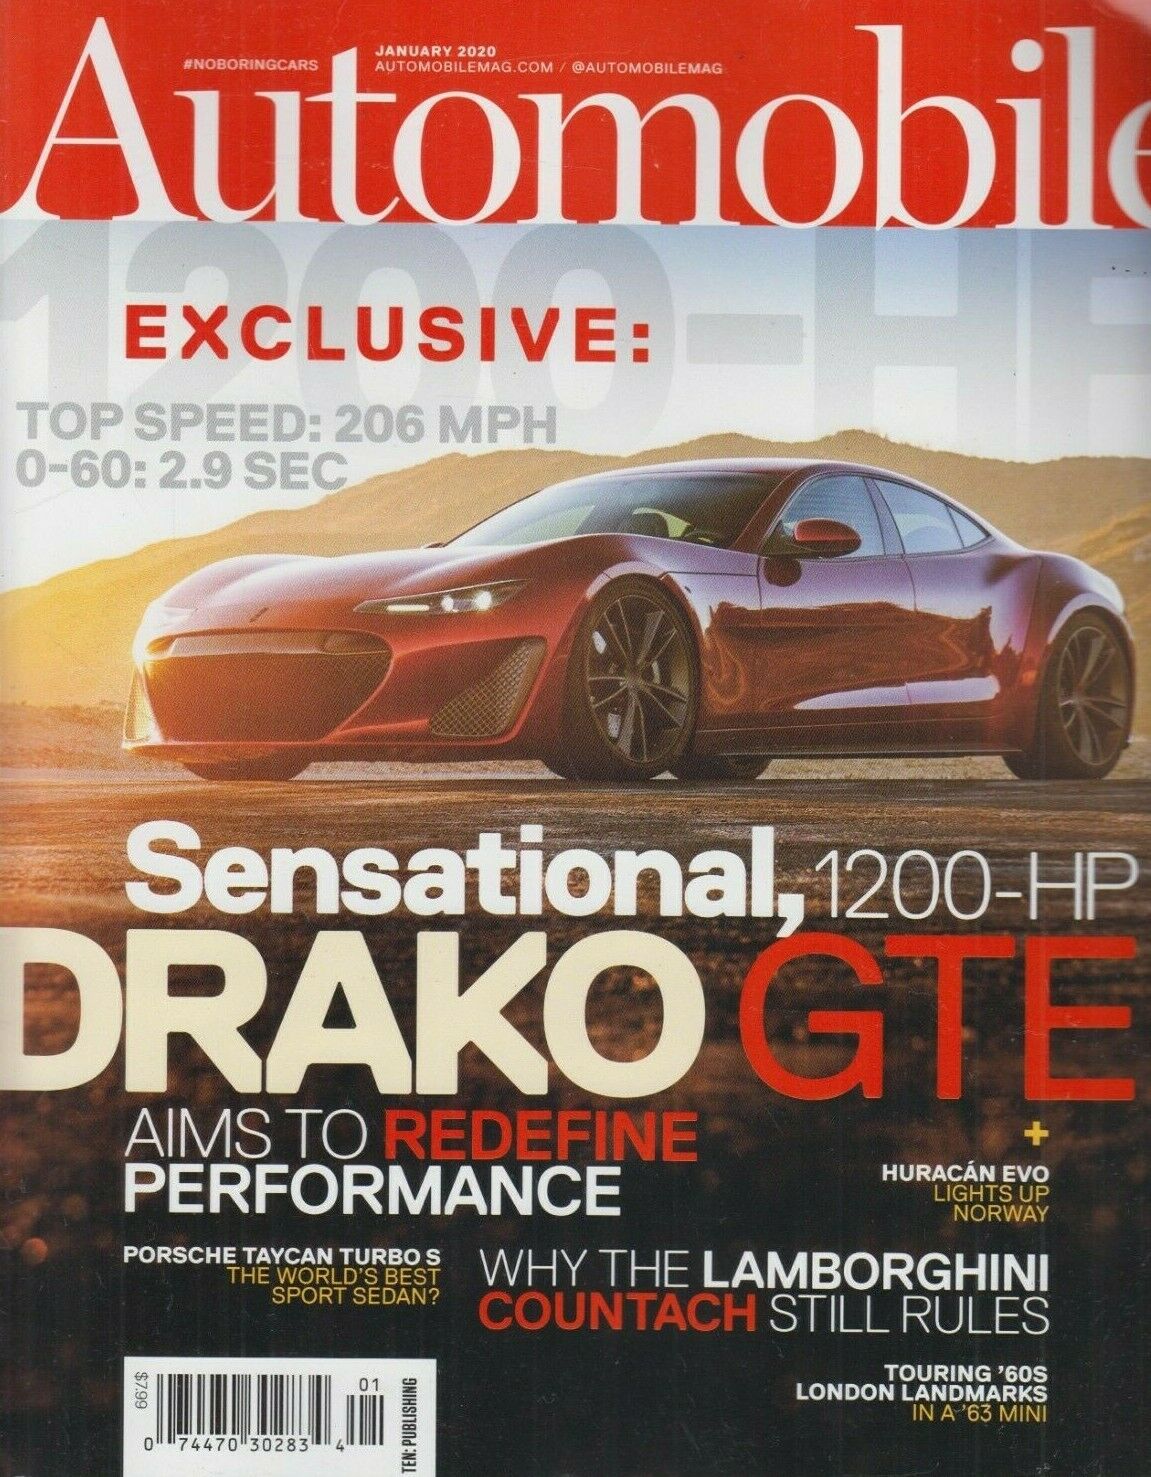 Automobile # 5, January 2020 magazine back issue Automobile magizine back copy Automobile # 5, January 2020 Magazine Back Issue Published by Car & Drivers Motor Trend Group. Exclusive: Top Speed: 206 MPH 0-60 2.9 Sec.